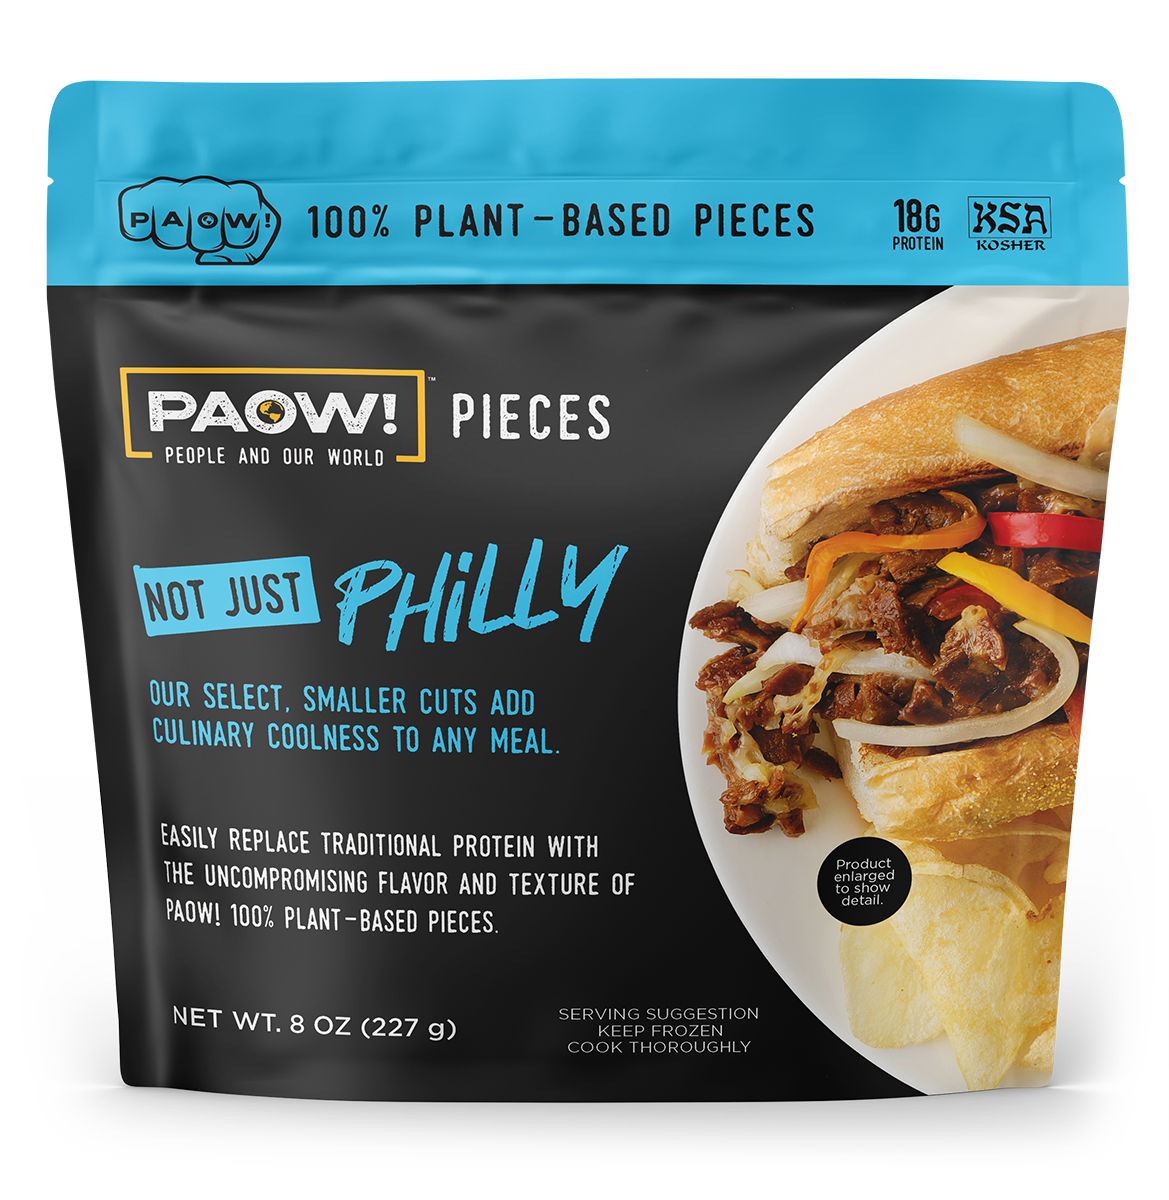 PAOW! "Not Just" Philly Pieces - Retails